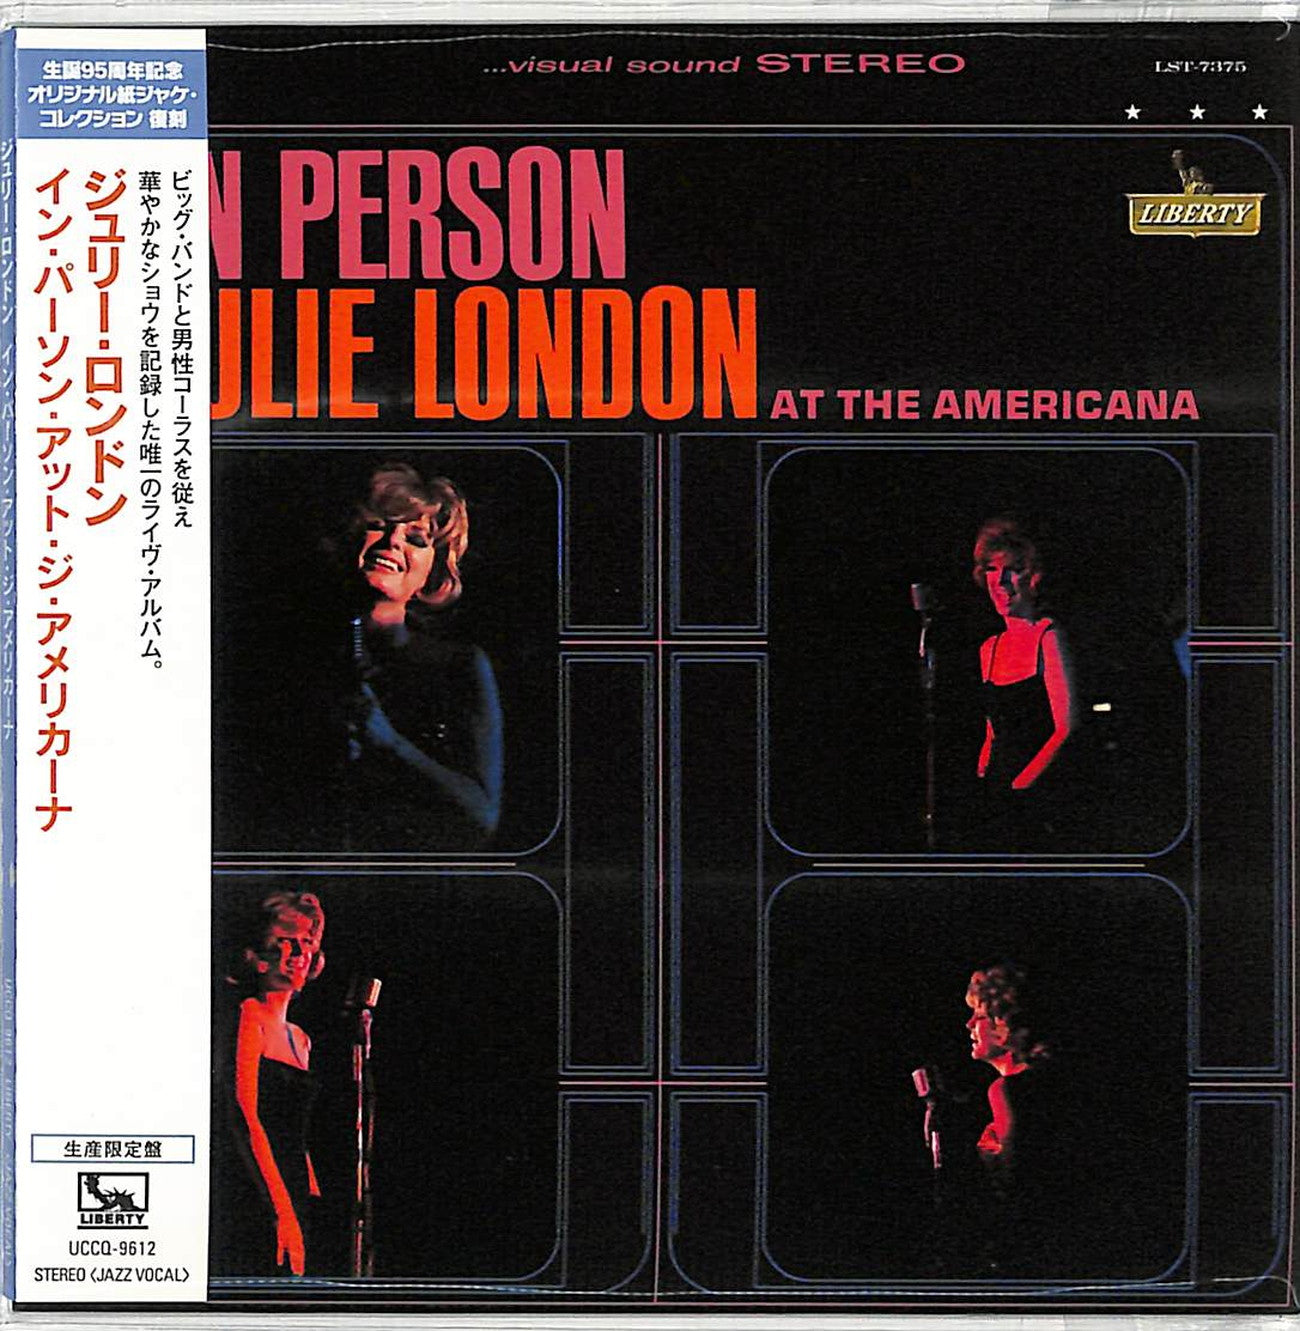 Julie London - In Person At The Americana - Japan  Mini LP CD Limited Edition